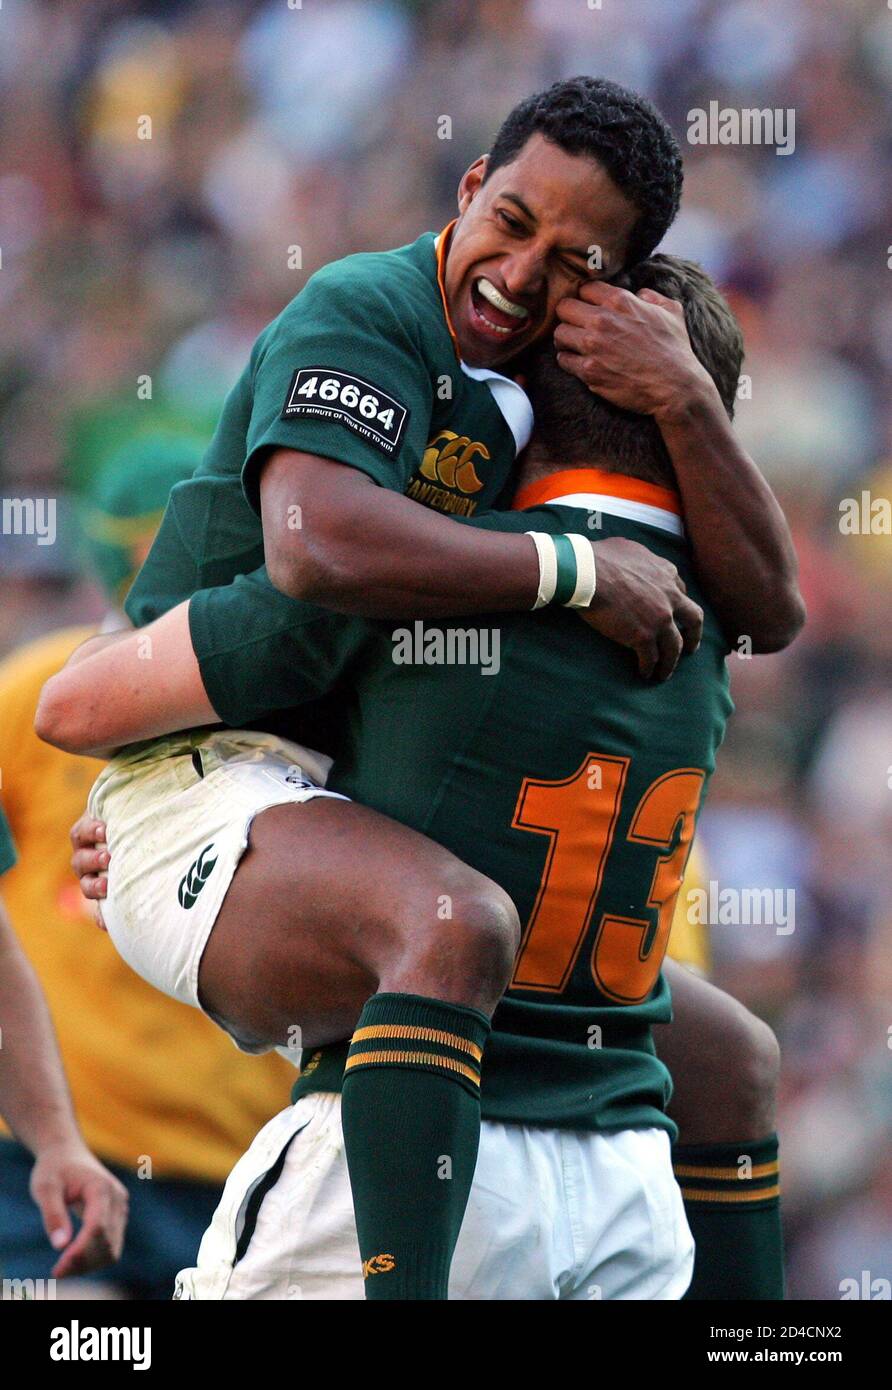 South Africa's Paulse celebrates with team mate Fourie after Fourie scored  during Nelson Mandela Rugby Challenge in Johannesburg. South Africa's  Breyton Paulse (L) celebrates with team mate Jaque Fourie (R) after Fourie